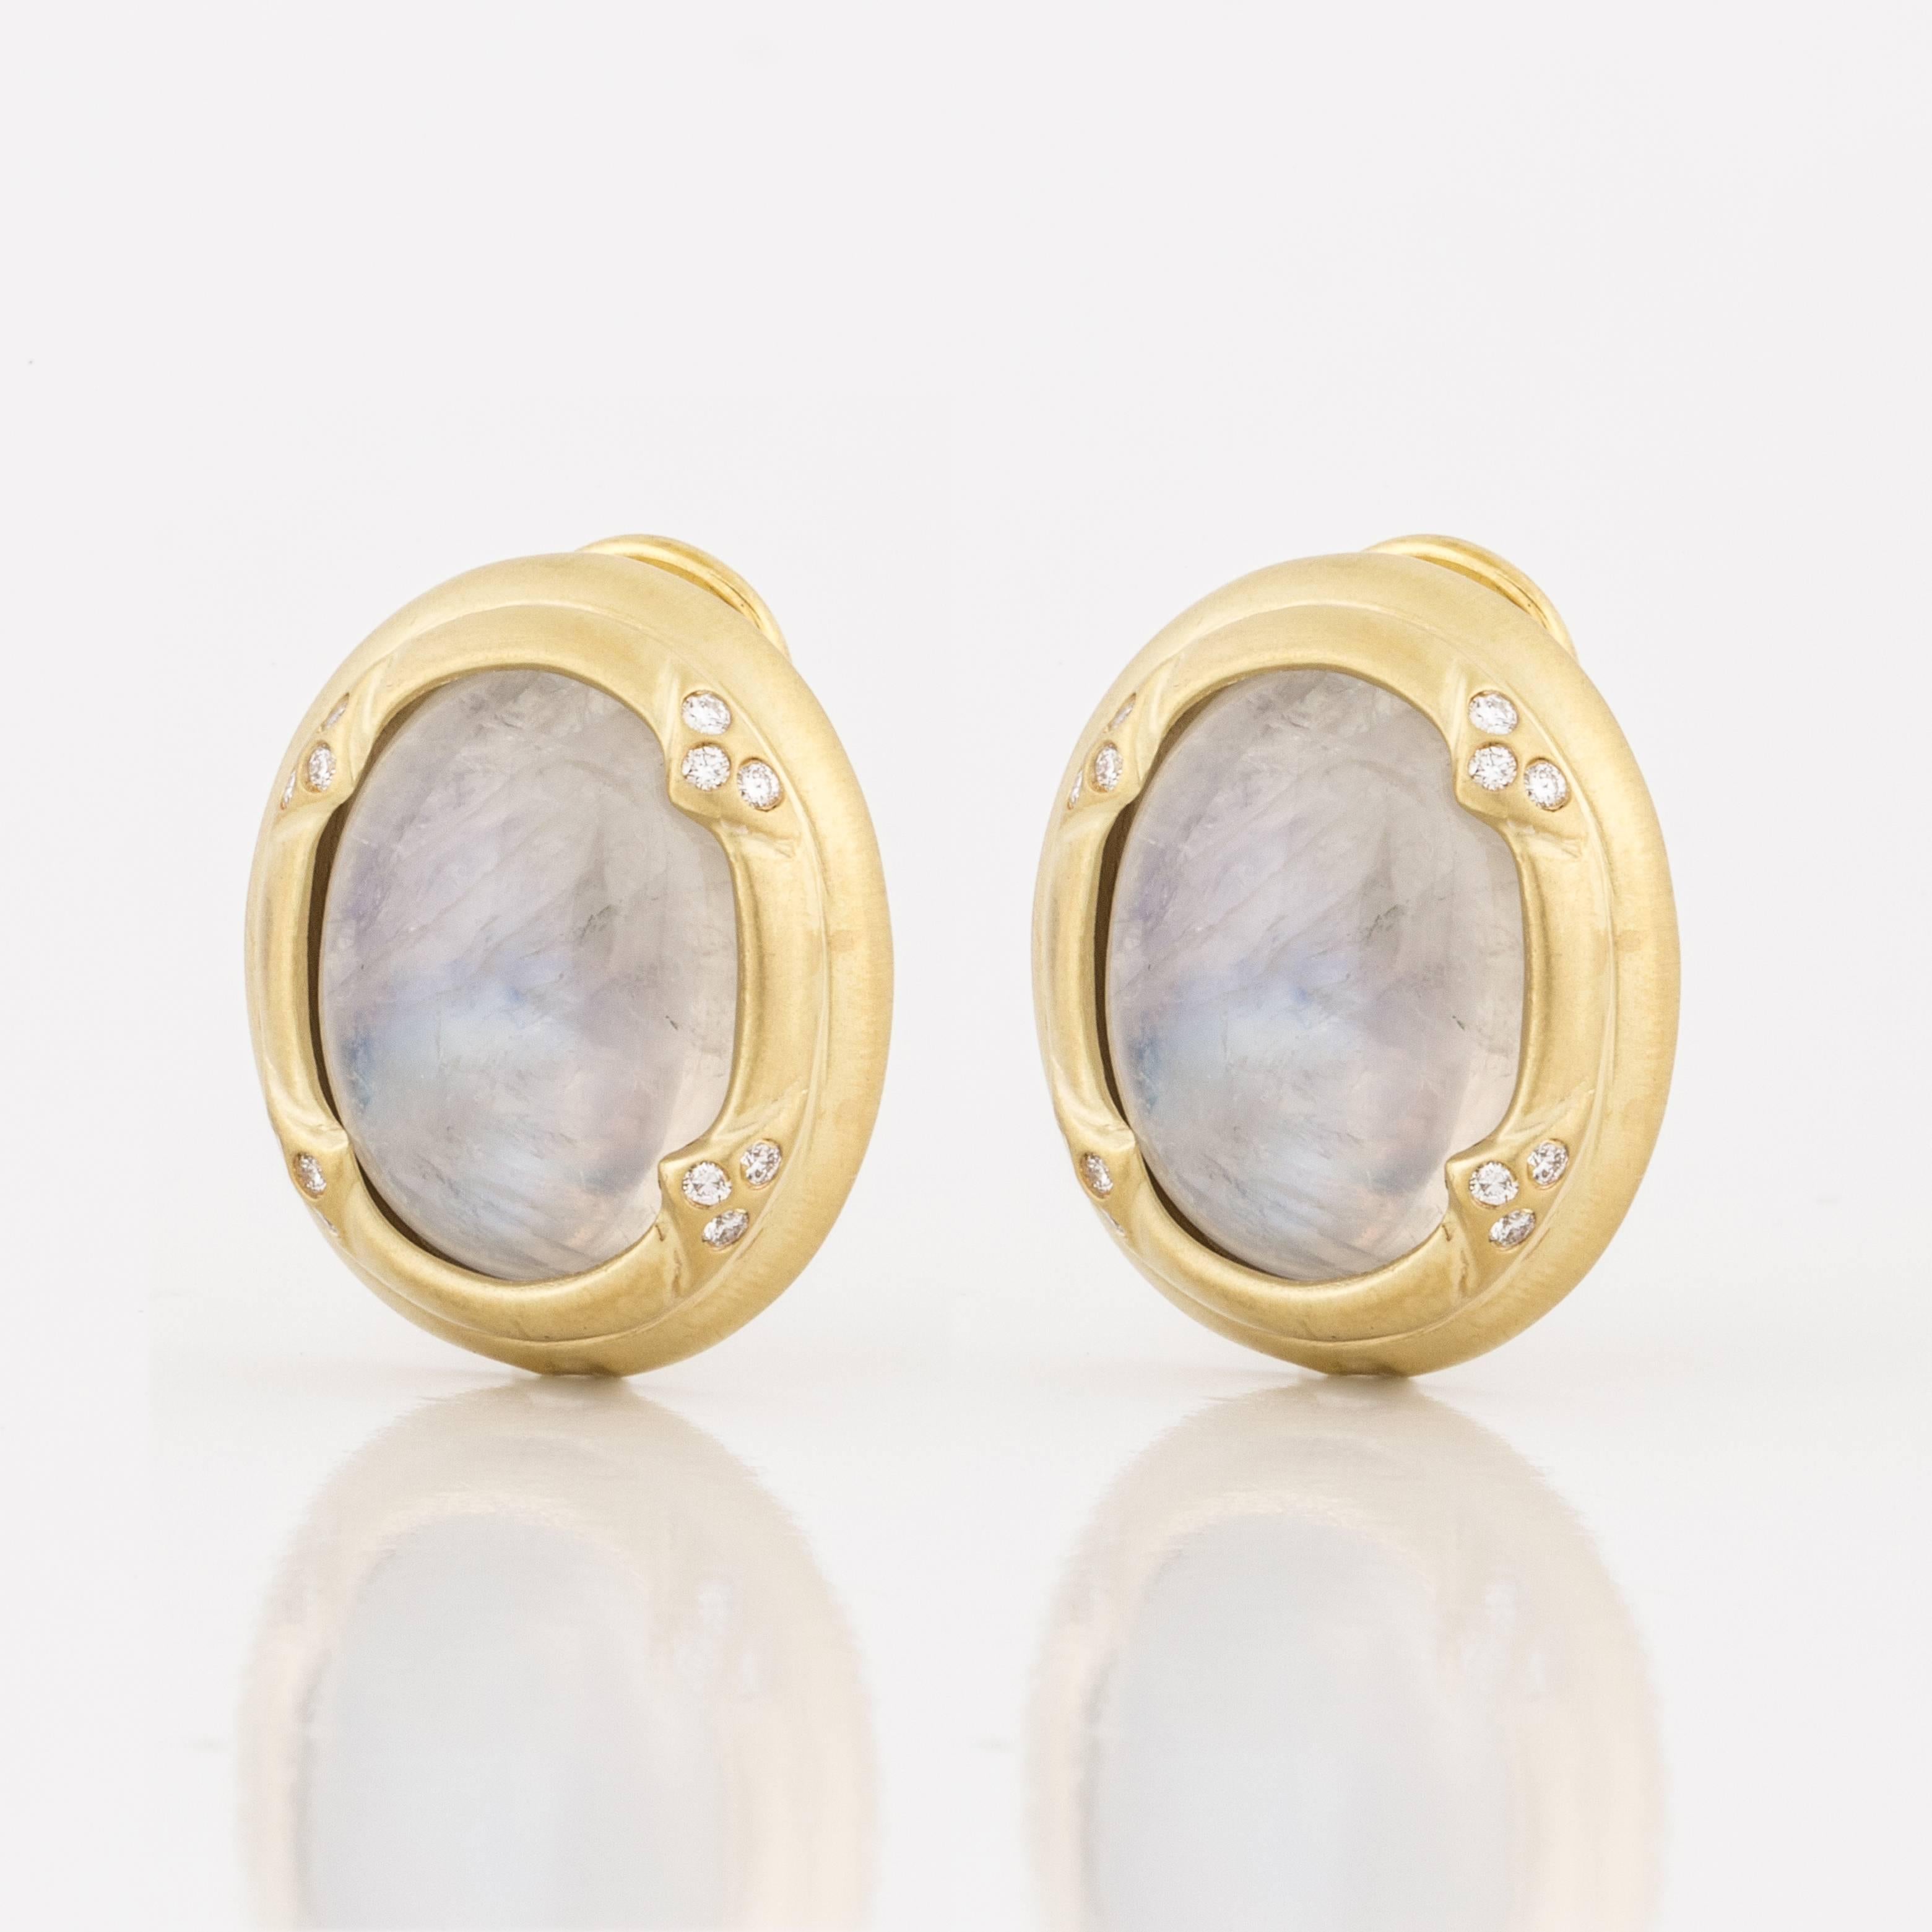 Mazza button style earring crafted in 14K yellow gold featuring oval cabochon moonstones, accented by round diamonds.  There are 24 round brilliant-cut diamonds that total 0.25 carats; F-G color and VS1-2 clarity.  The gold has a soft brushed